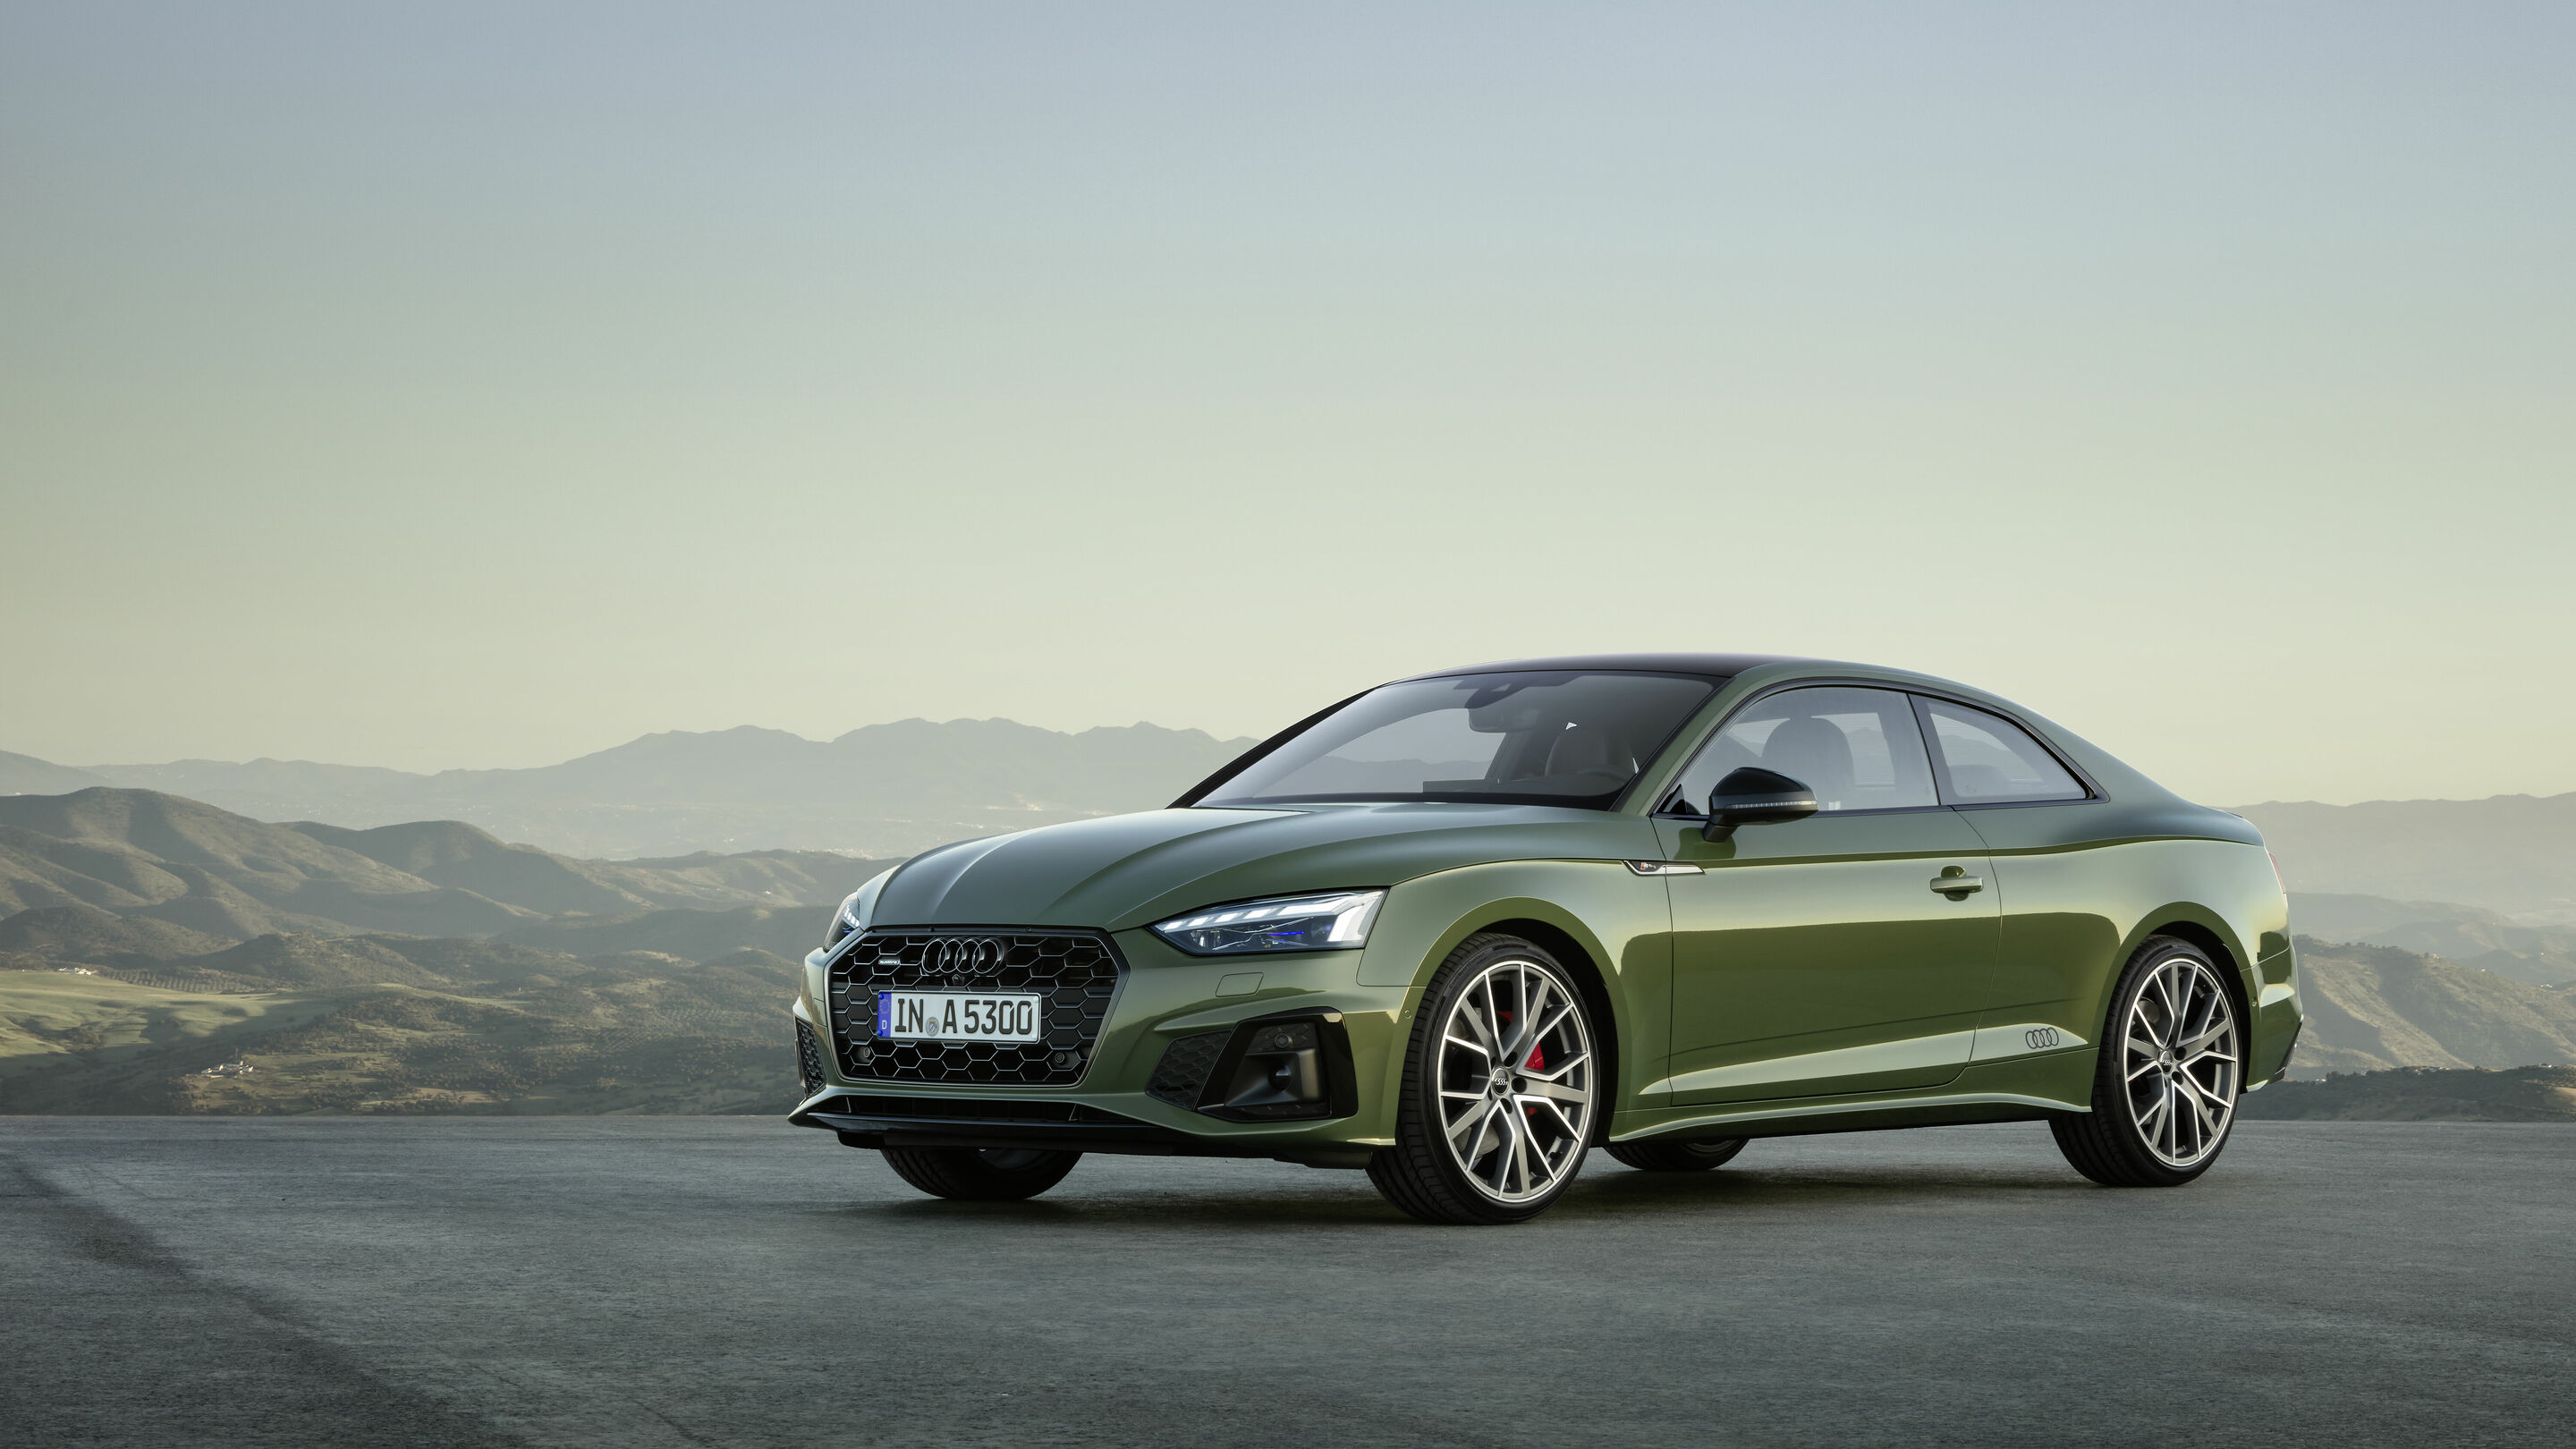 The Audi A5: New Look and New Technologies